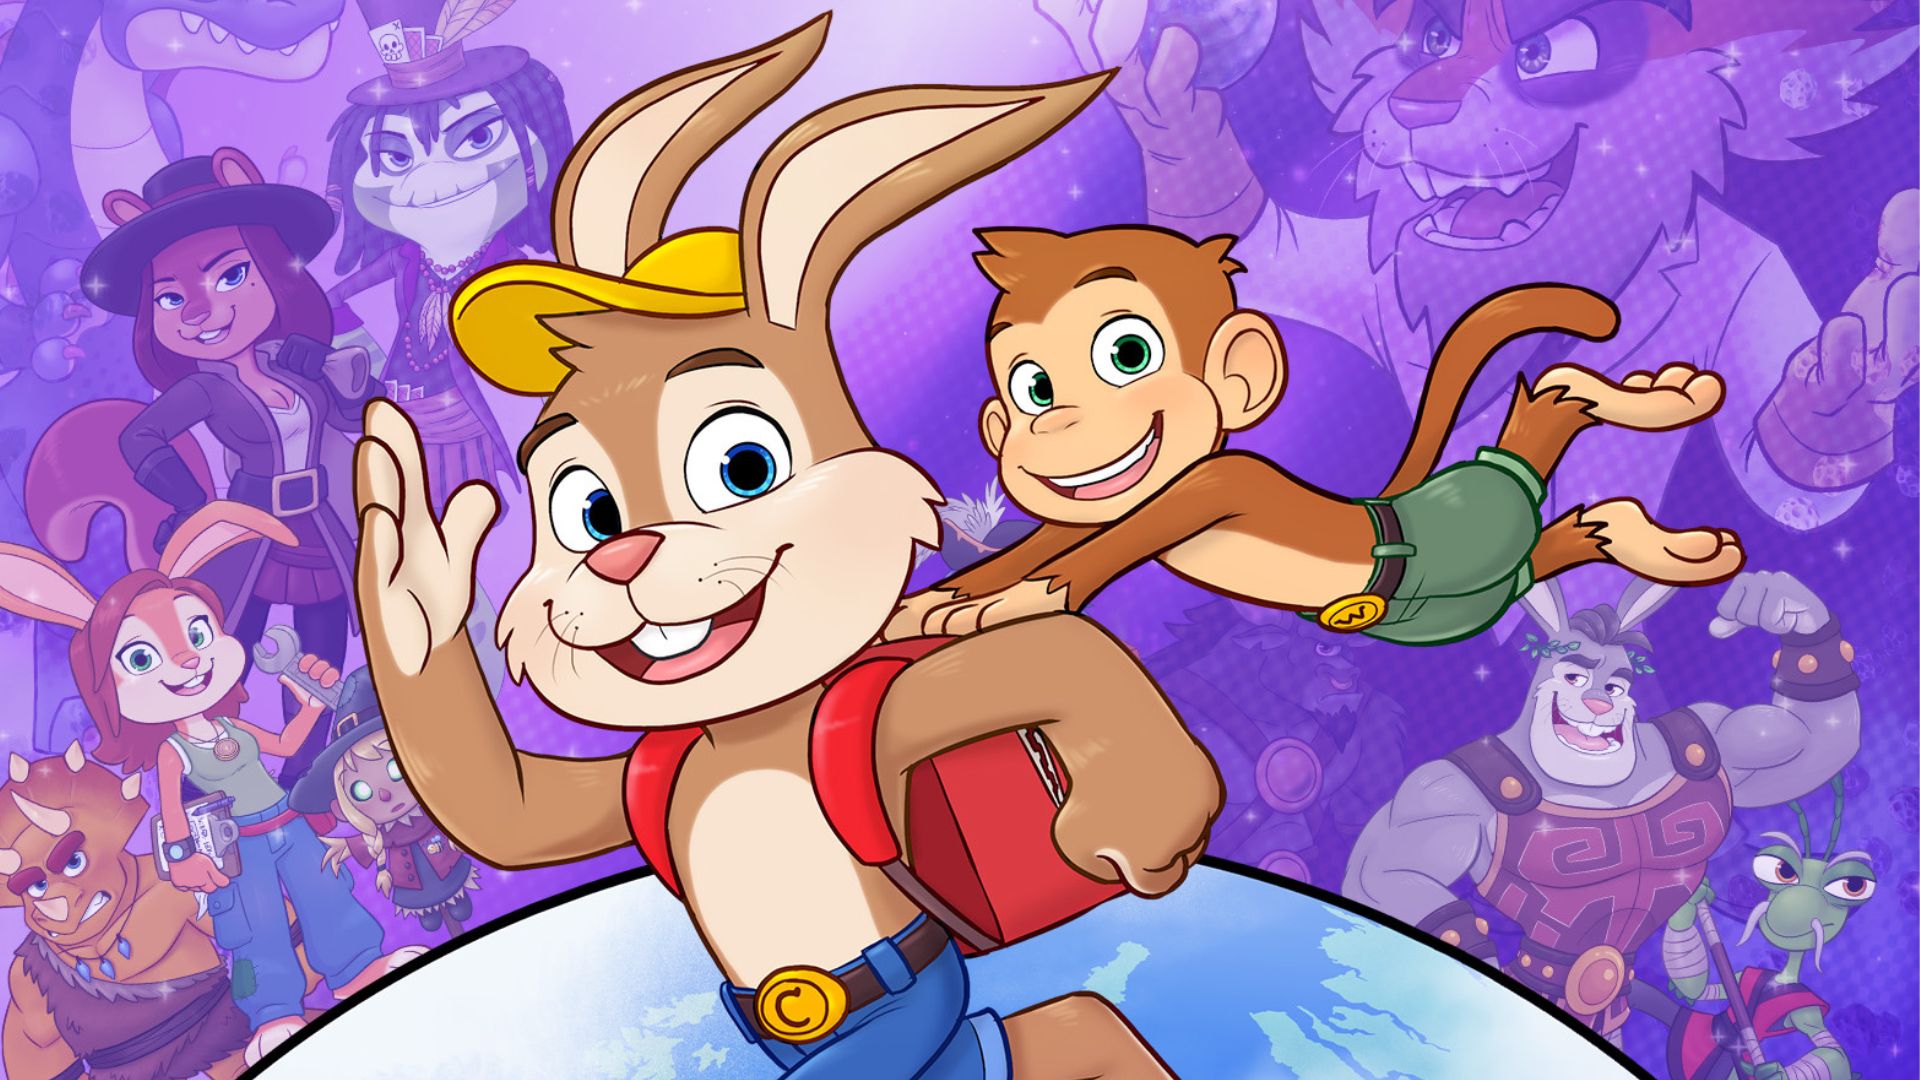 Clive N Wrench: Official art of Clive the rabbit and Wrench the monkey smiling at the camera